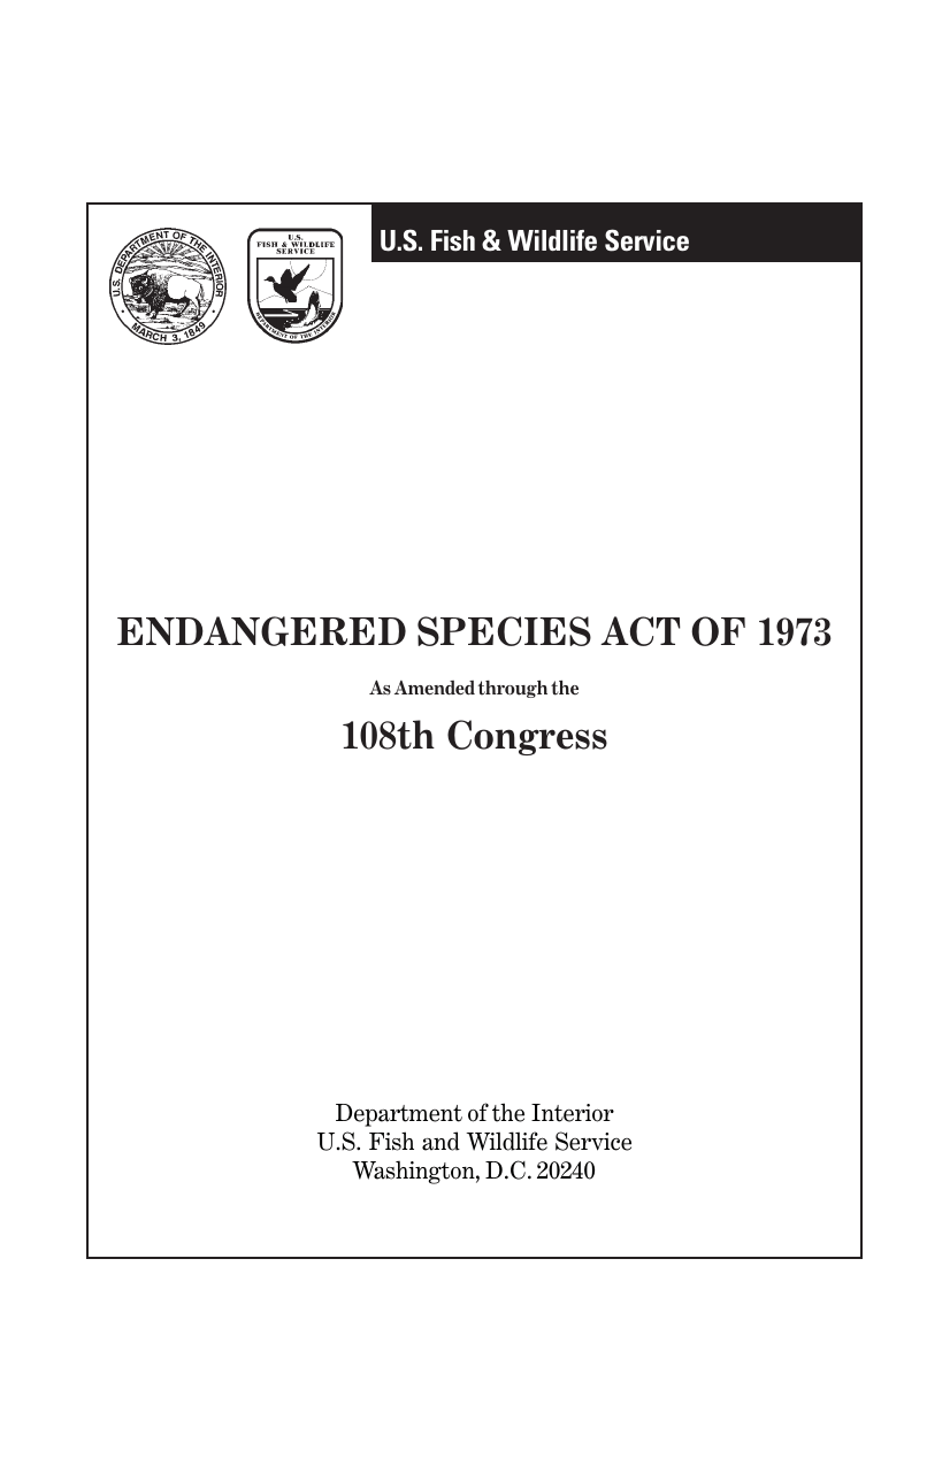 Endangered Species Act of 1973 as Amended Through the 108th Congress, Page 1